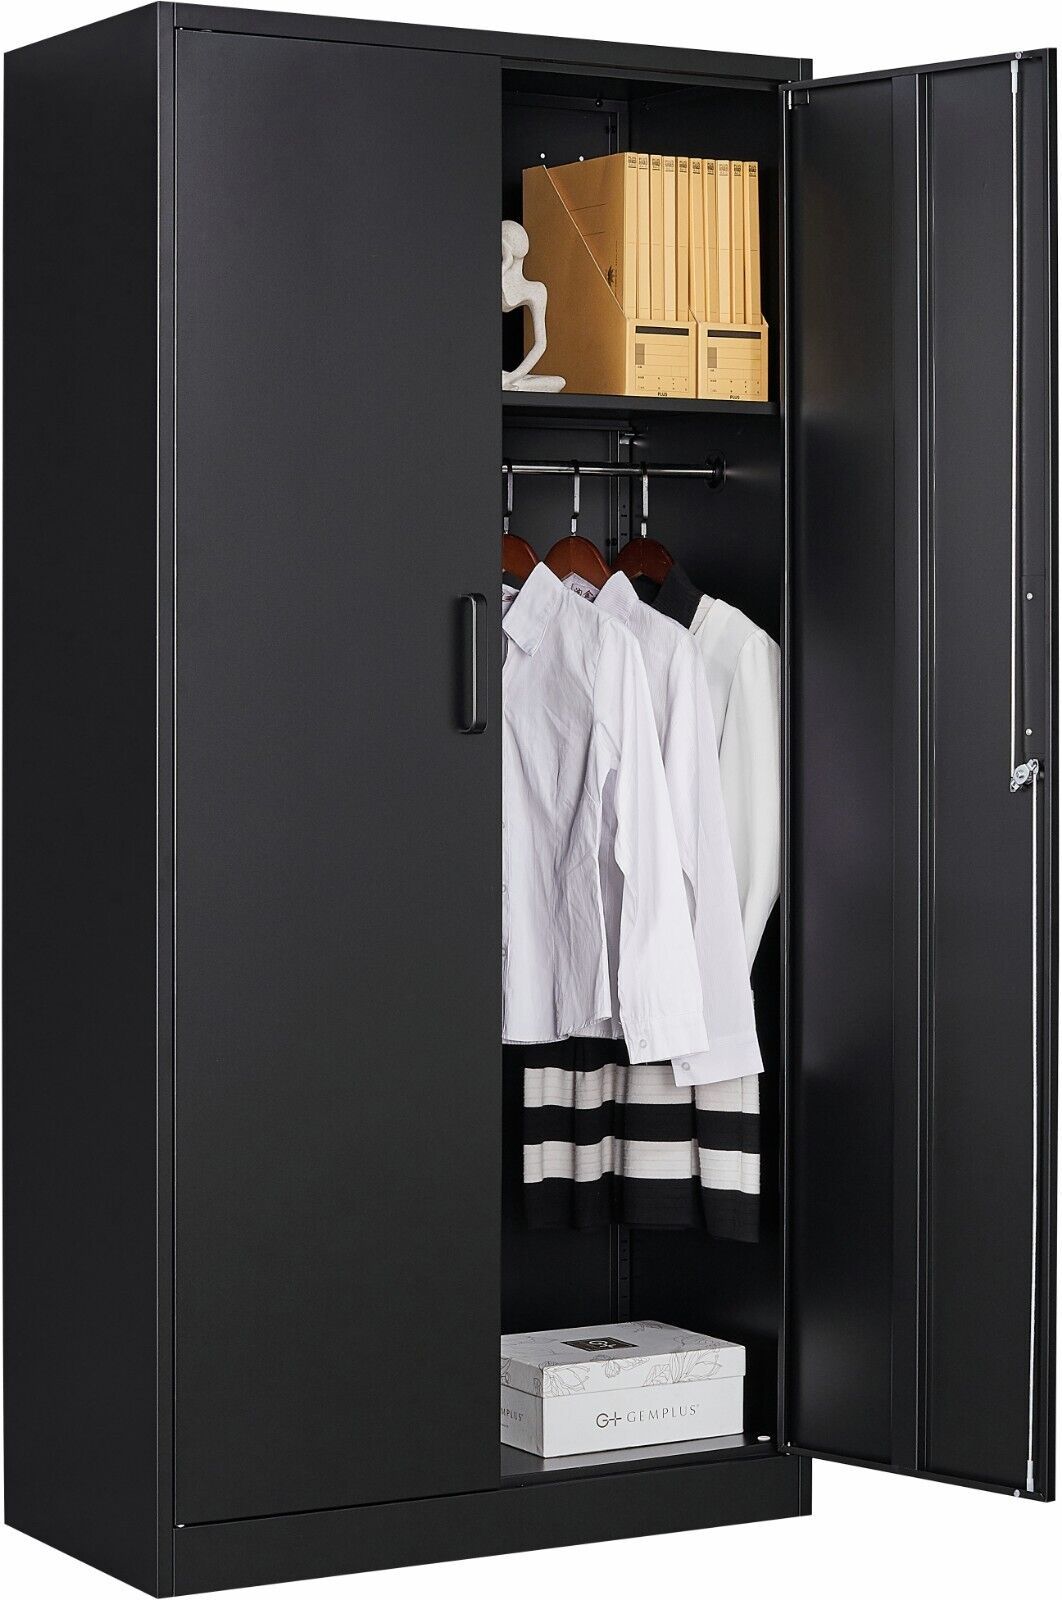 72” Tall Steel Wardrobe Storage Closet Cabinet Clothes Organizer For  Bedroom | Ebay Throughout Metal Wardrobes (View 3 of 15)